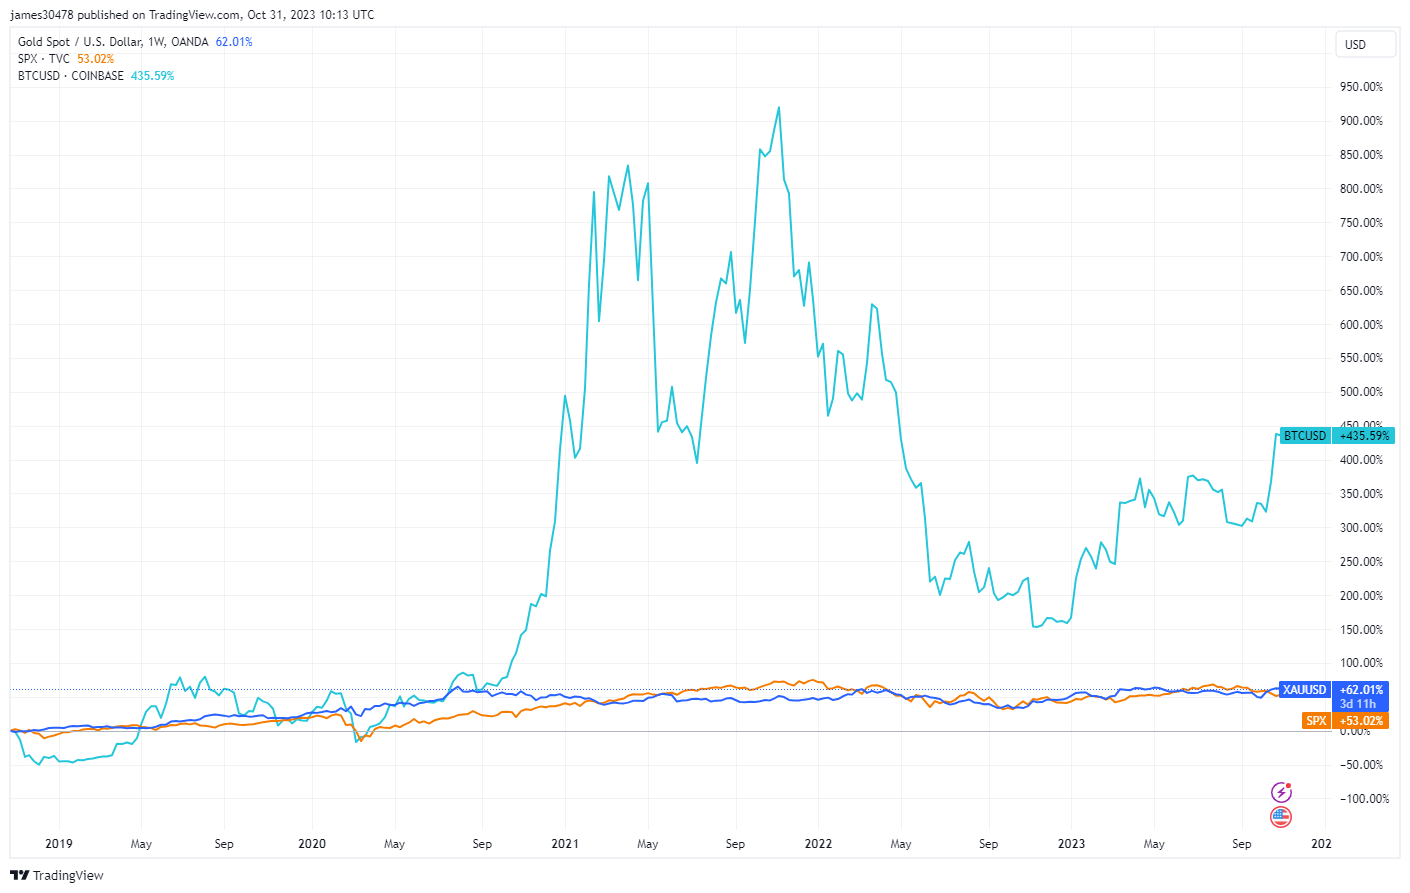 BTC, SPX, Gold - past 5 years: (Source: Trading View)